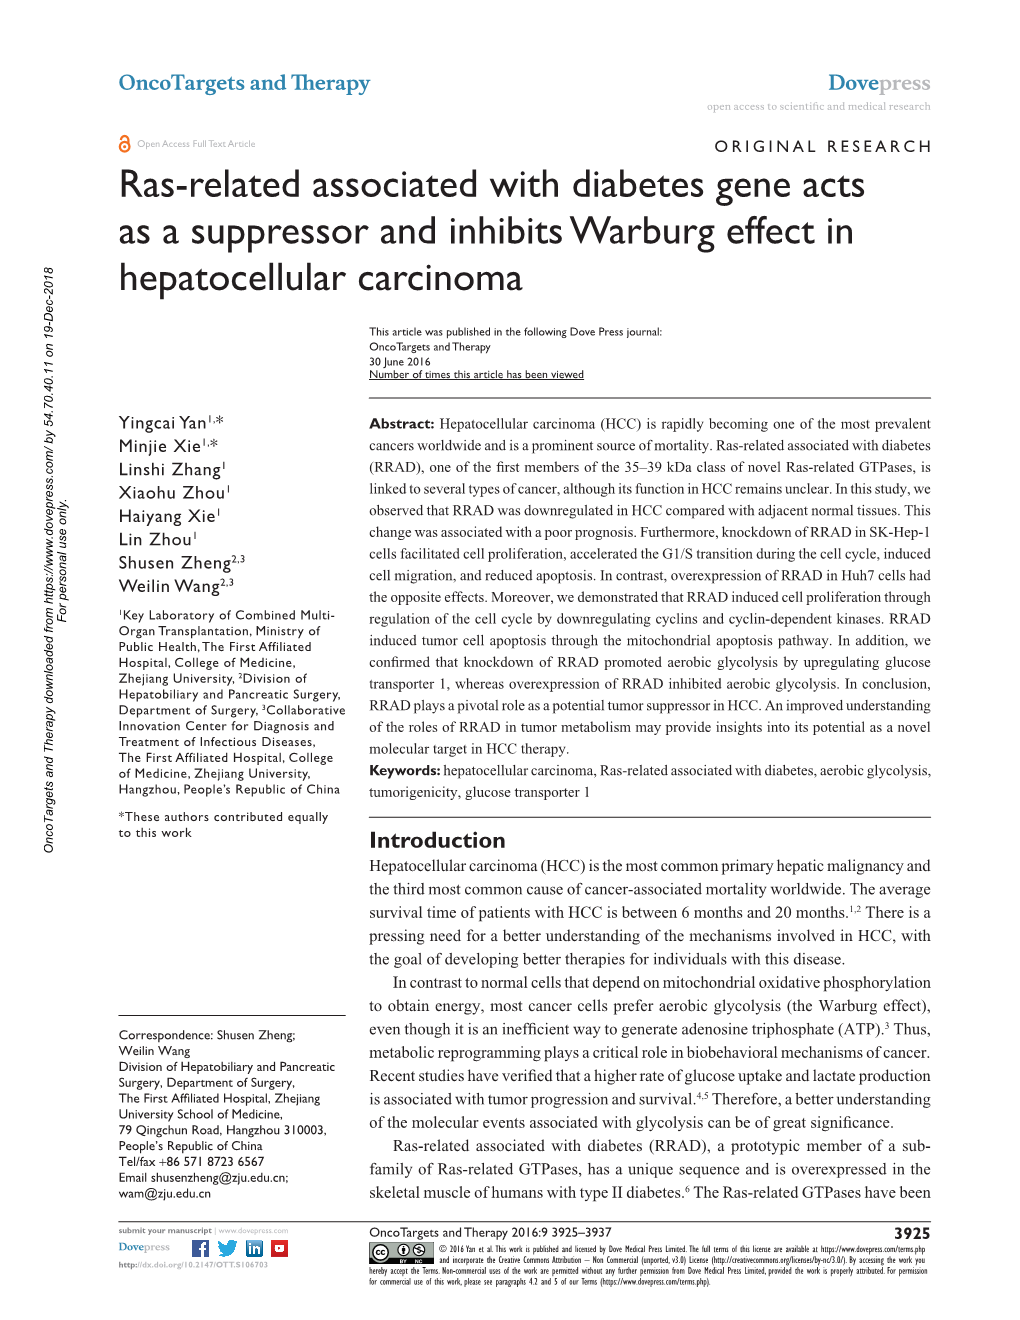 Ras-Related Associated with Diabetes Gene Acts As a Suppressor and Inhibits Warburg Effect in Hepatocellular Carcinoma